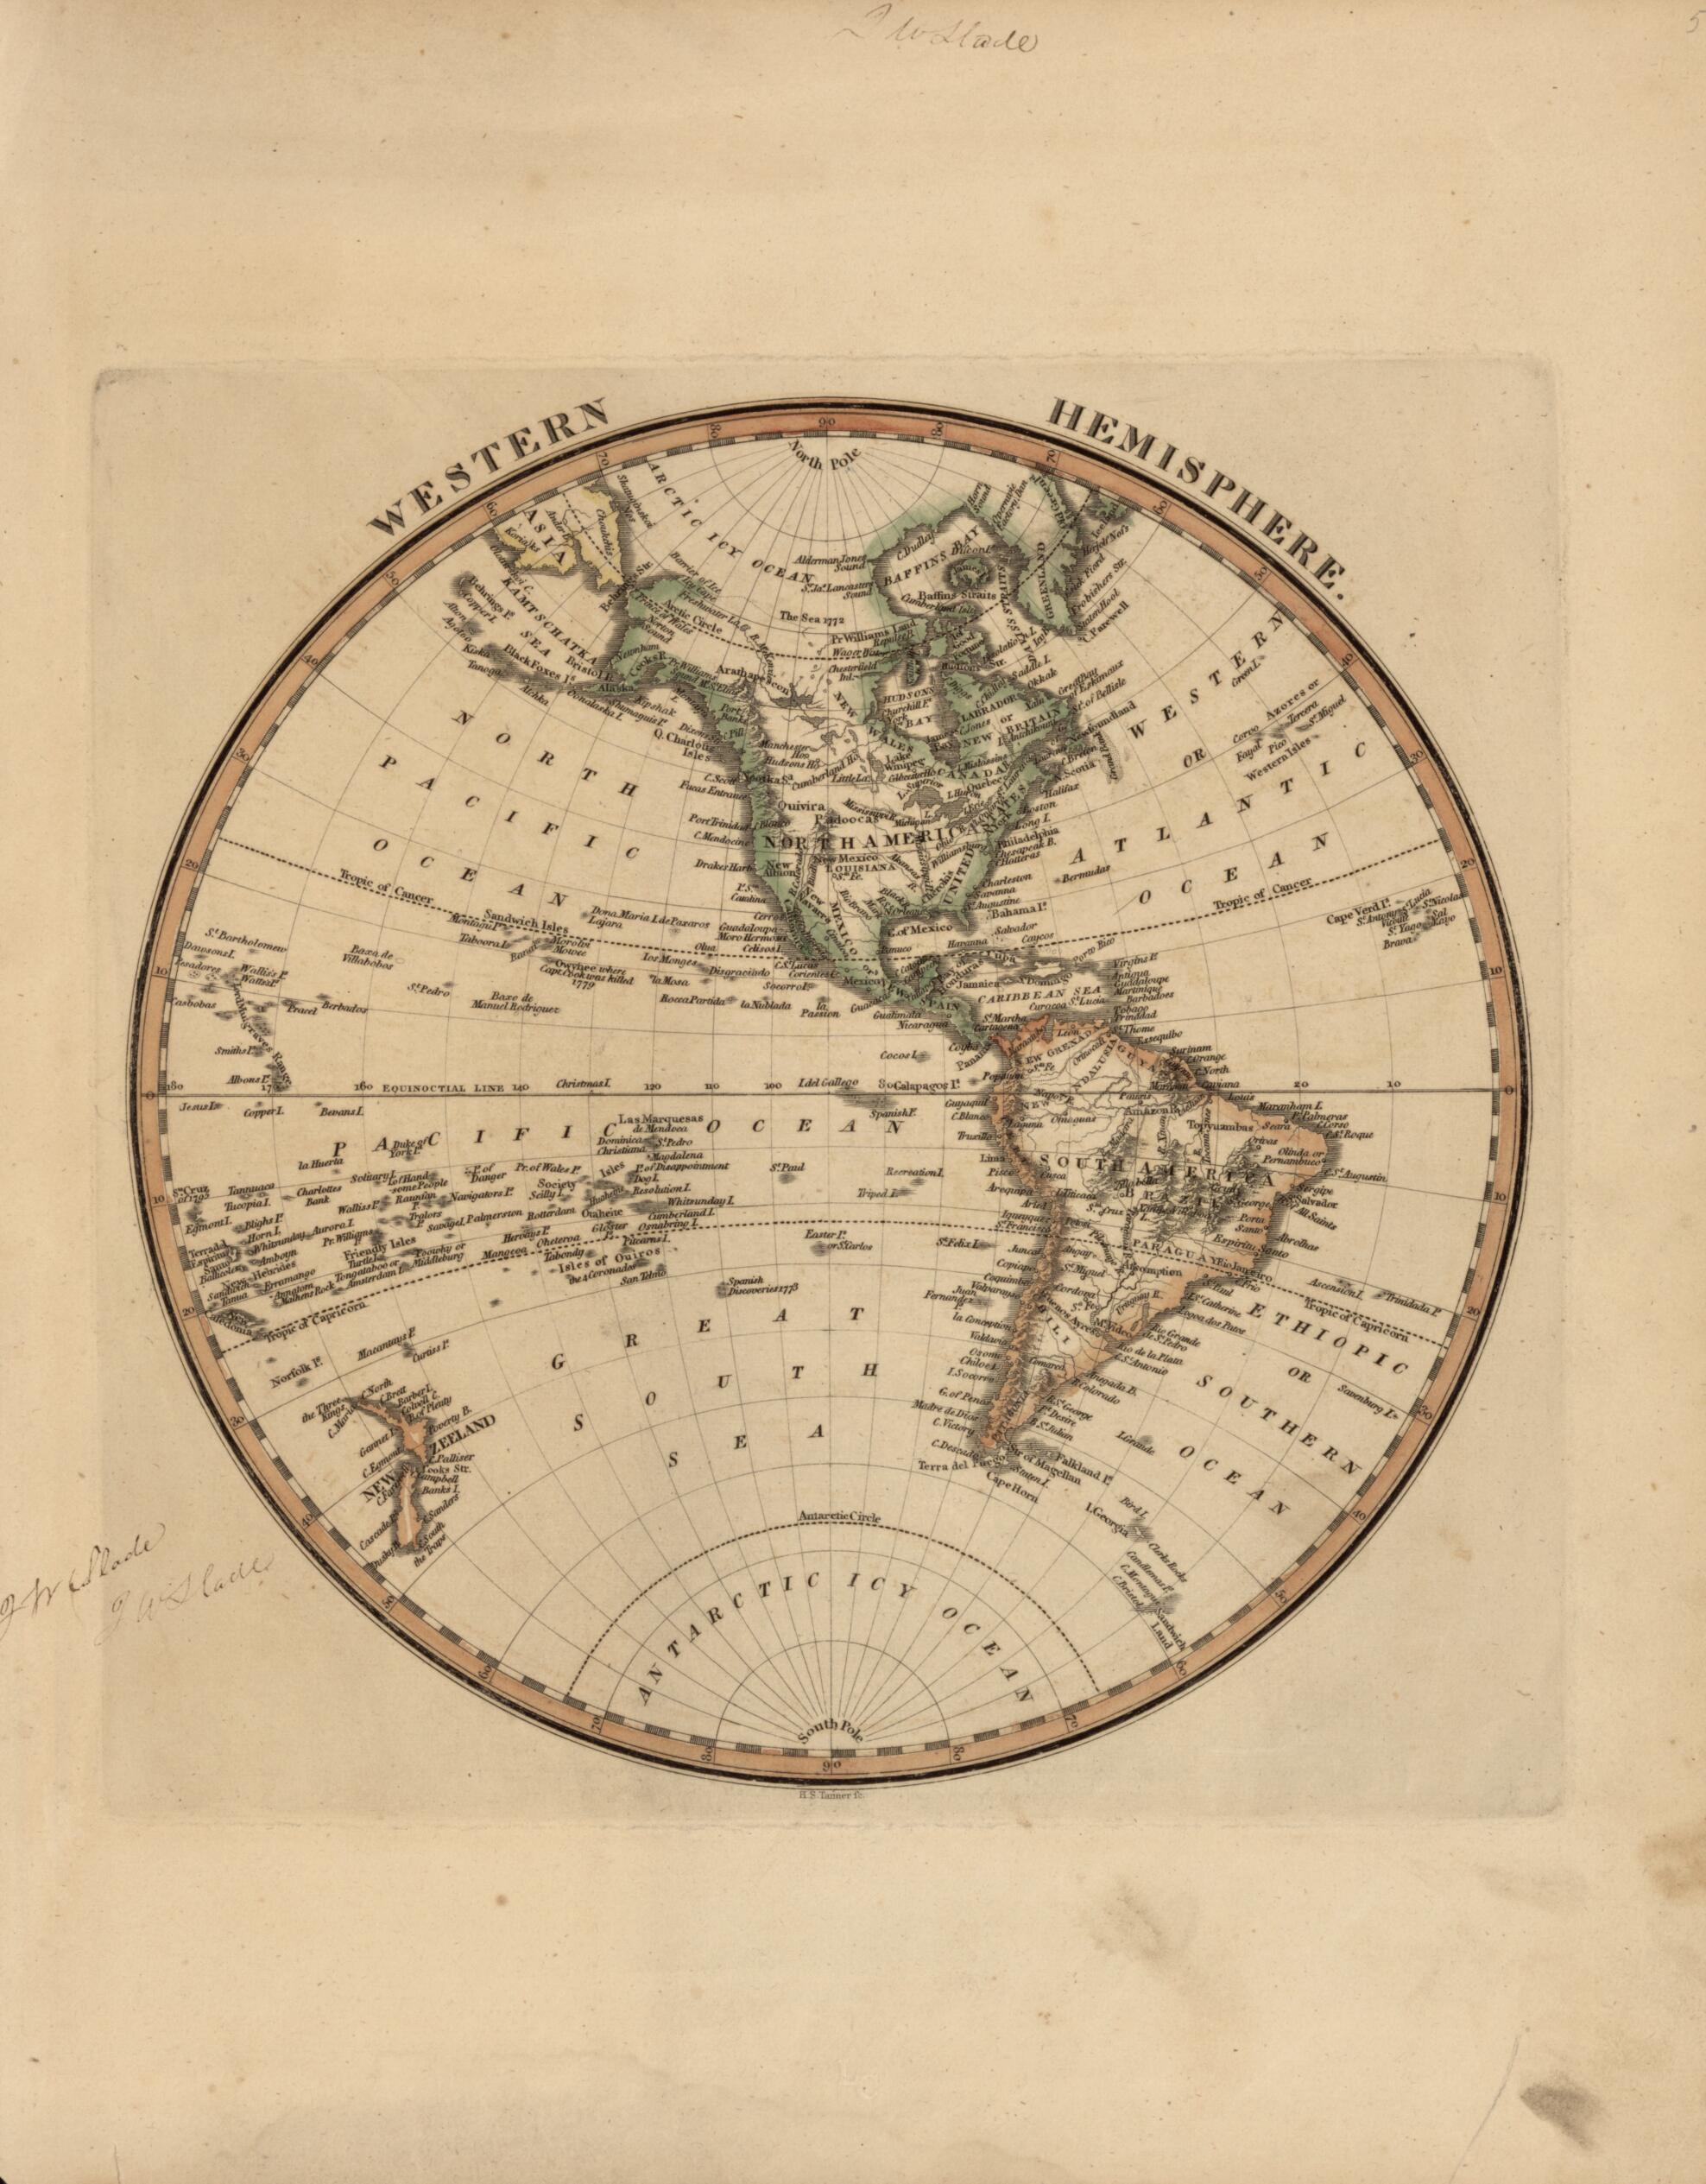 This old map of Western Hemisphere from a New and Elegant General Atlas, Containing Maps of Each of the United States. from 1817 was created by Henry Schenck Tanner in 1817